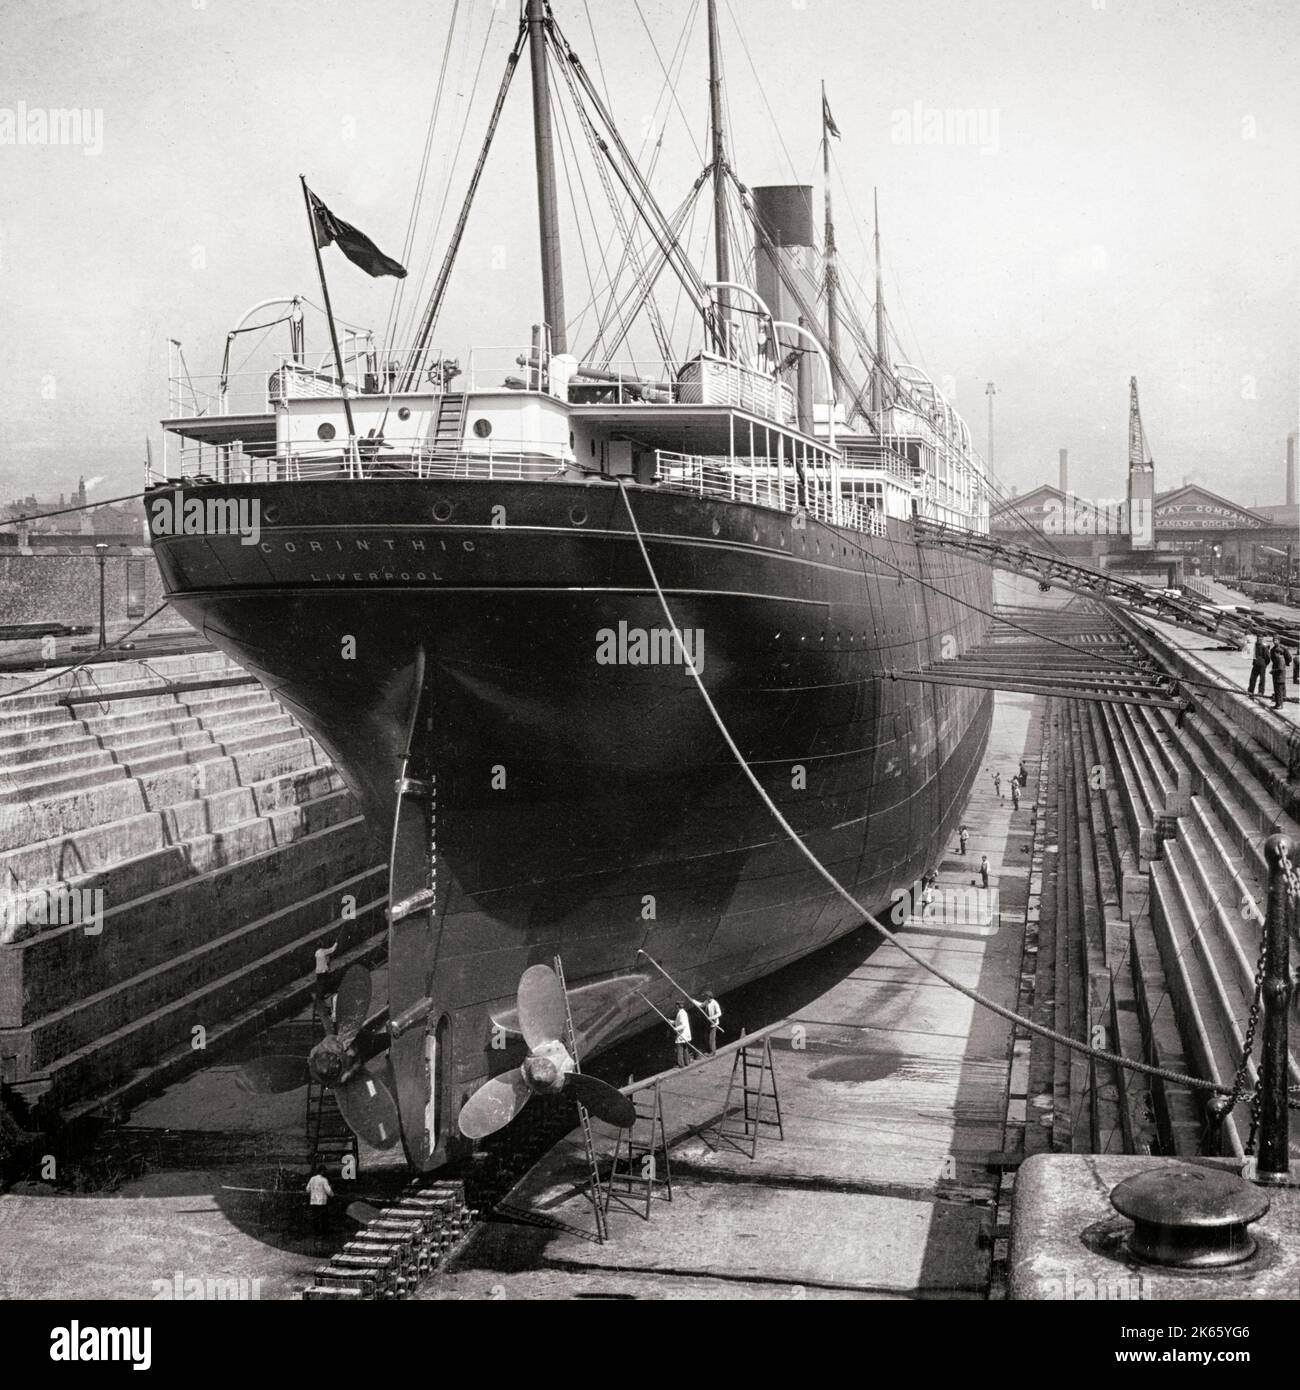 An early 20th century view of the 'Corinthian' in the dry dock (then the world's largest dry dock) next to the Albert dock on the  Liverpool waterfront, England. Built as a cargo and passenger liner for the White Star Line and Shaw, Savill & Albion Lin,e she was launched in 1902 from Harland and Wolff in Belfast. Stock Photo